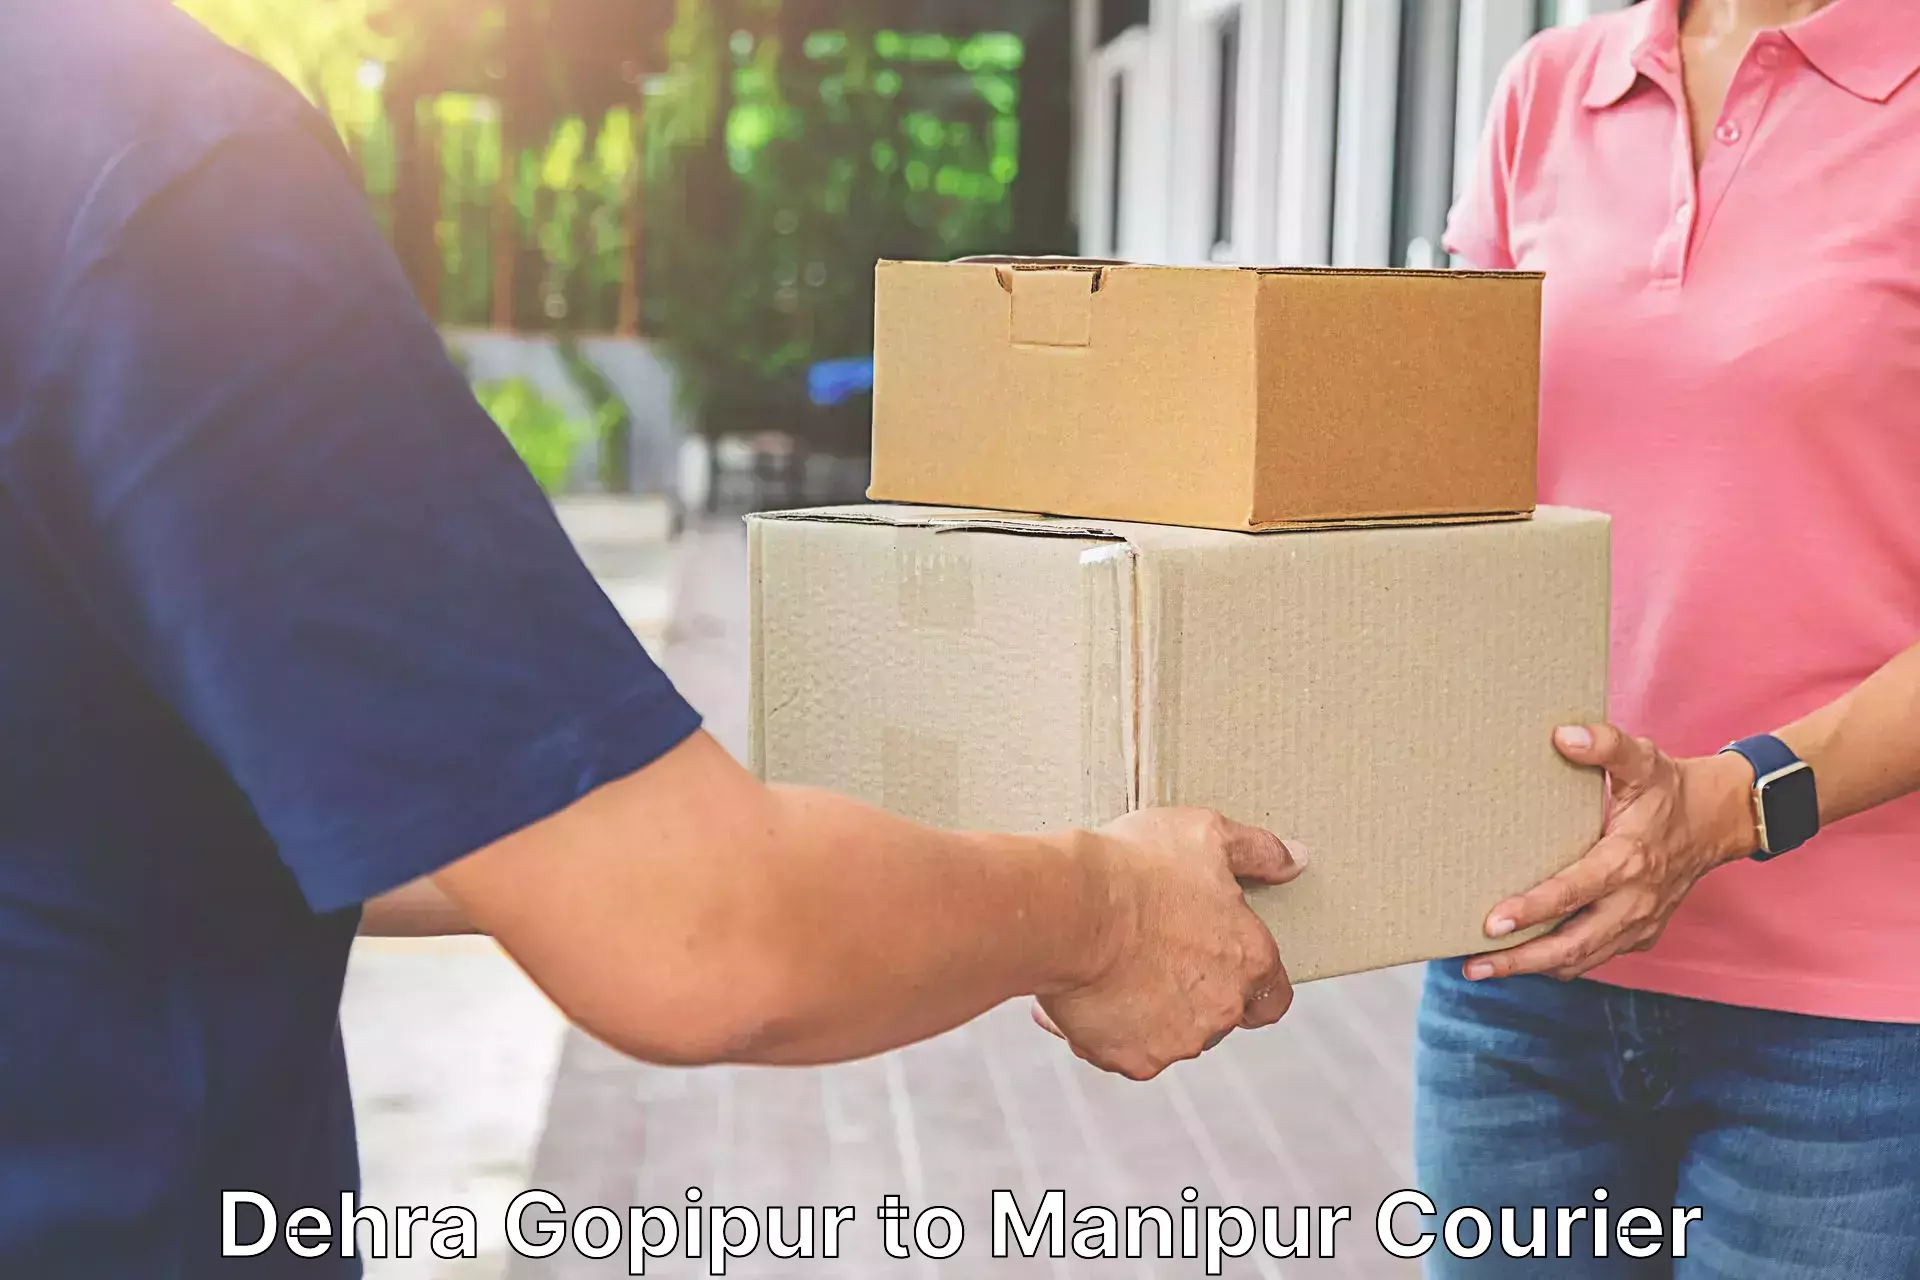 Same-day delivery options Dehra Gopipur to Manipur